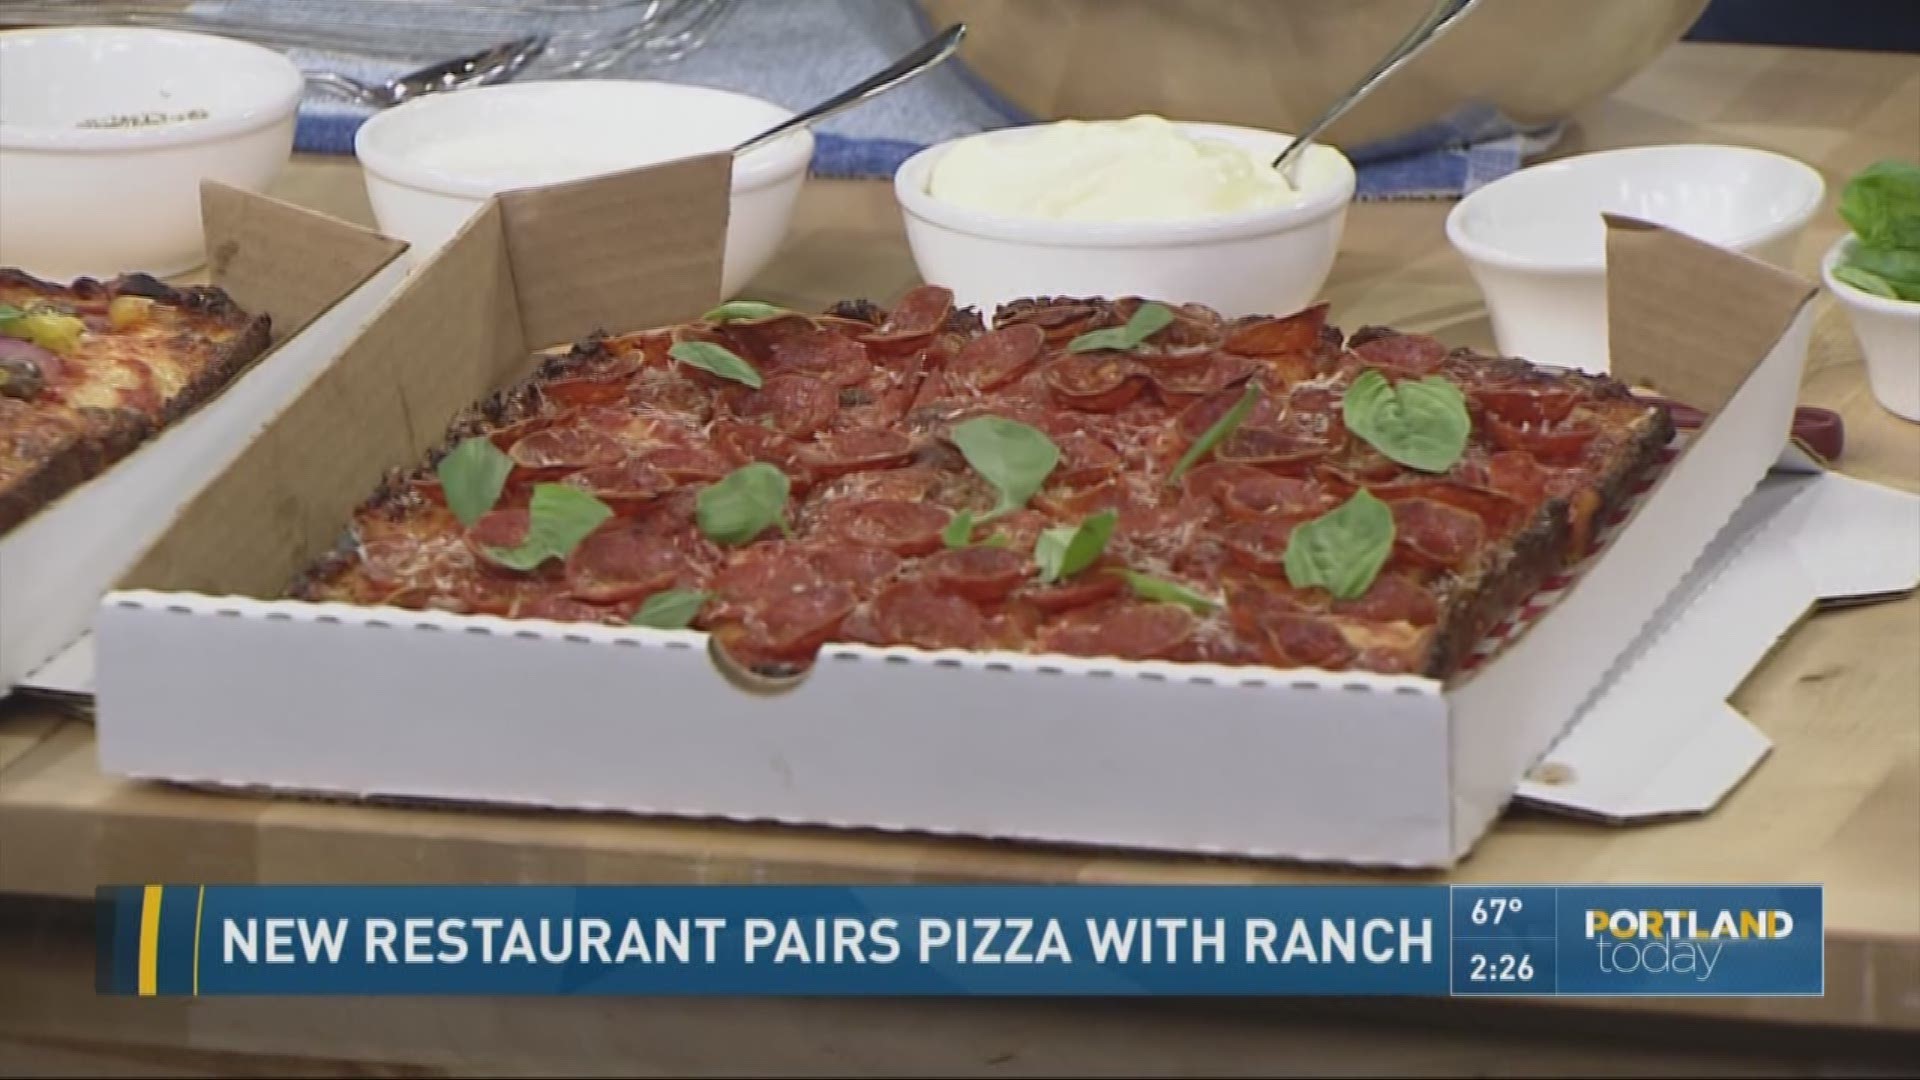 Restaurant pairs pizza with ranch